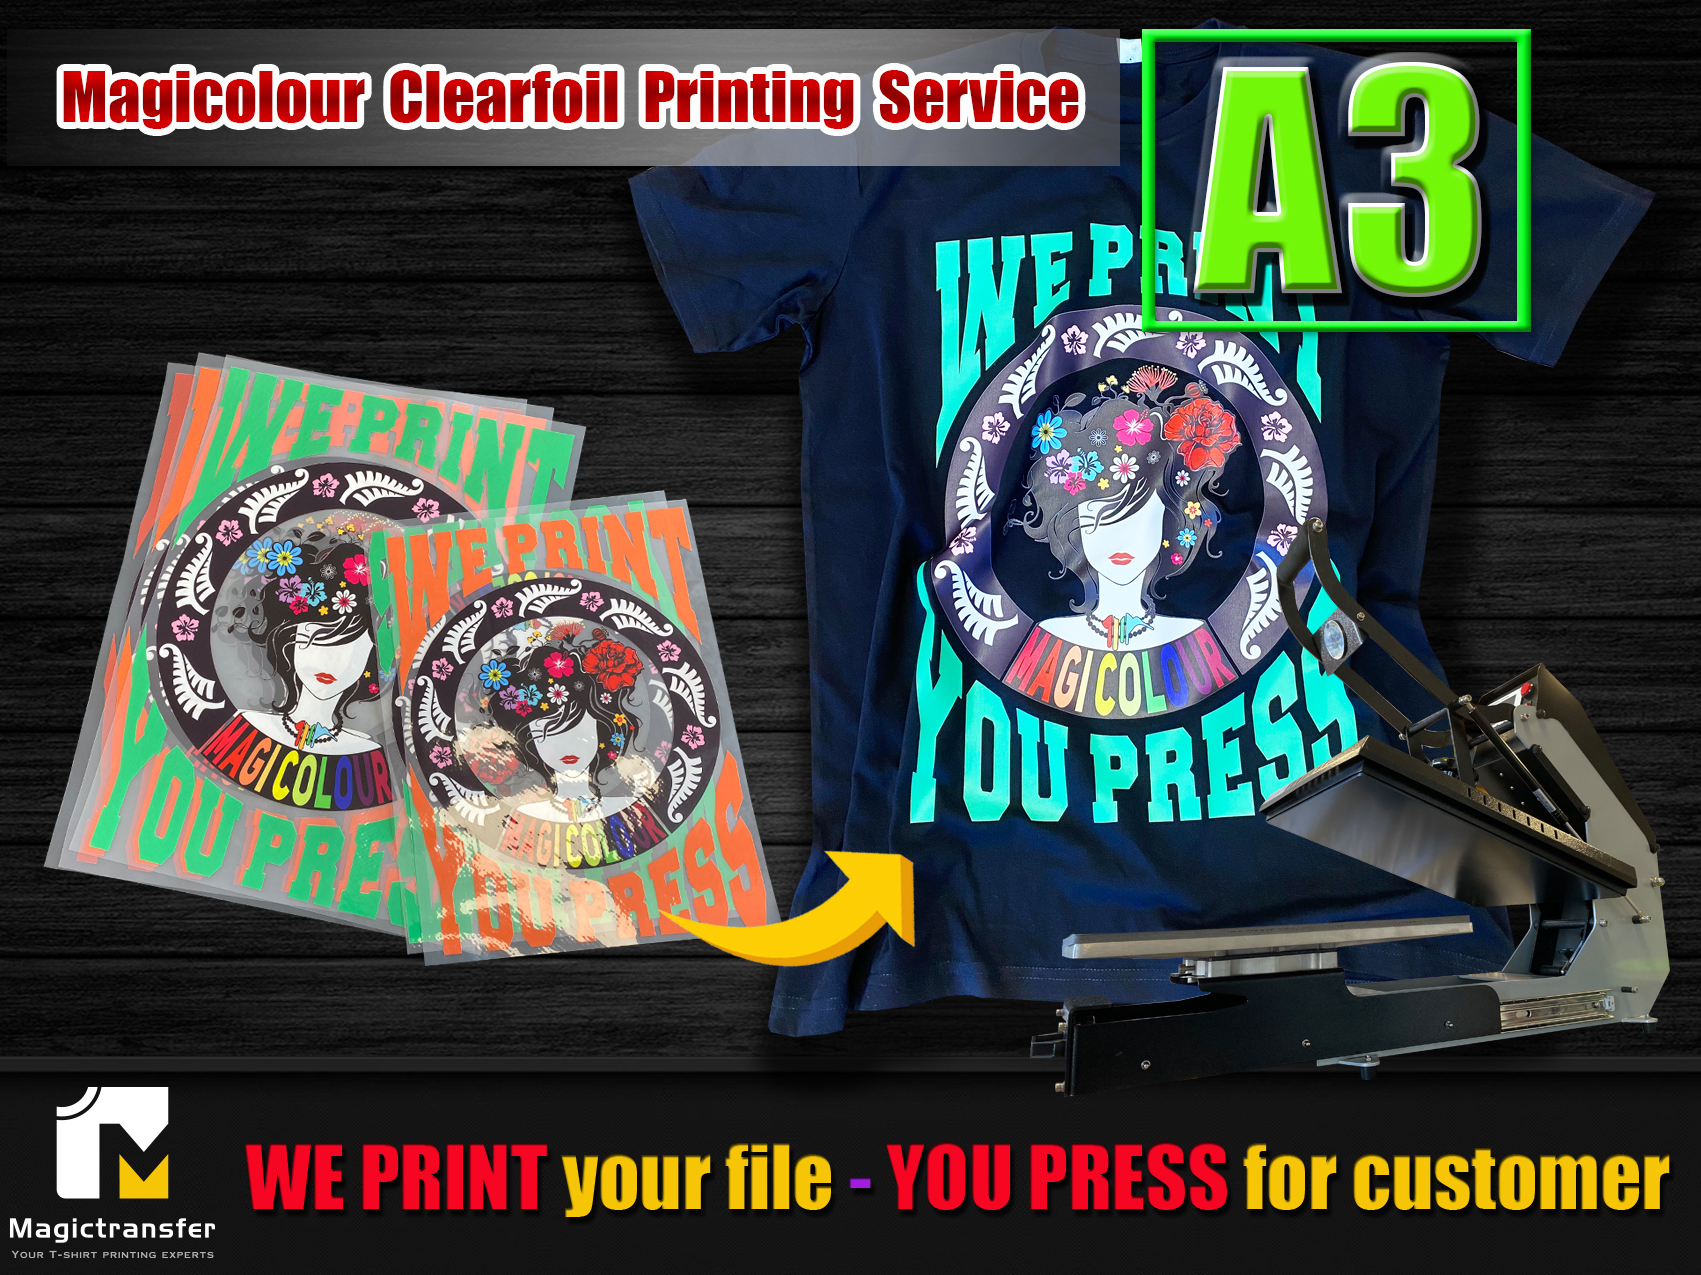 A3 SIZE -Magicolour Clear foil Printing Service- WE PRINT your file YOU PRESS for customer - Transfer